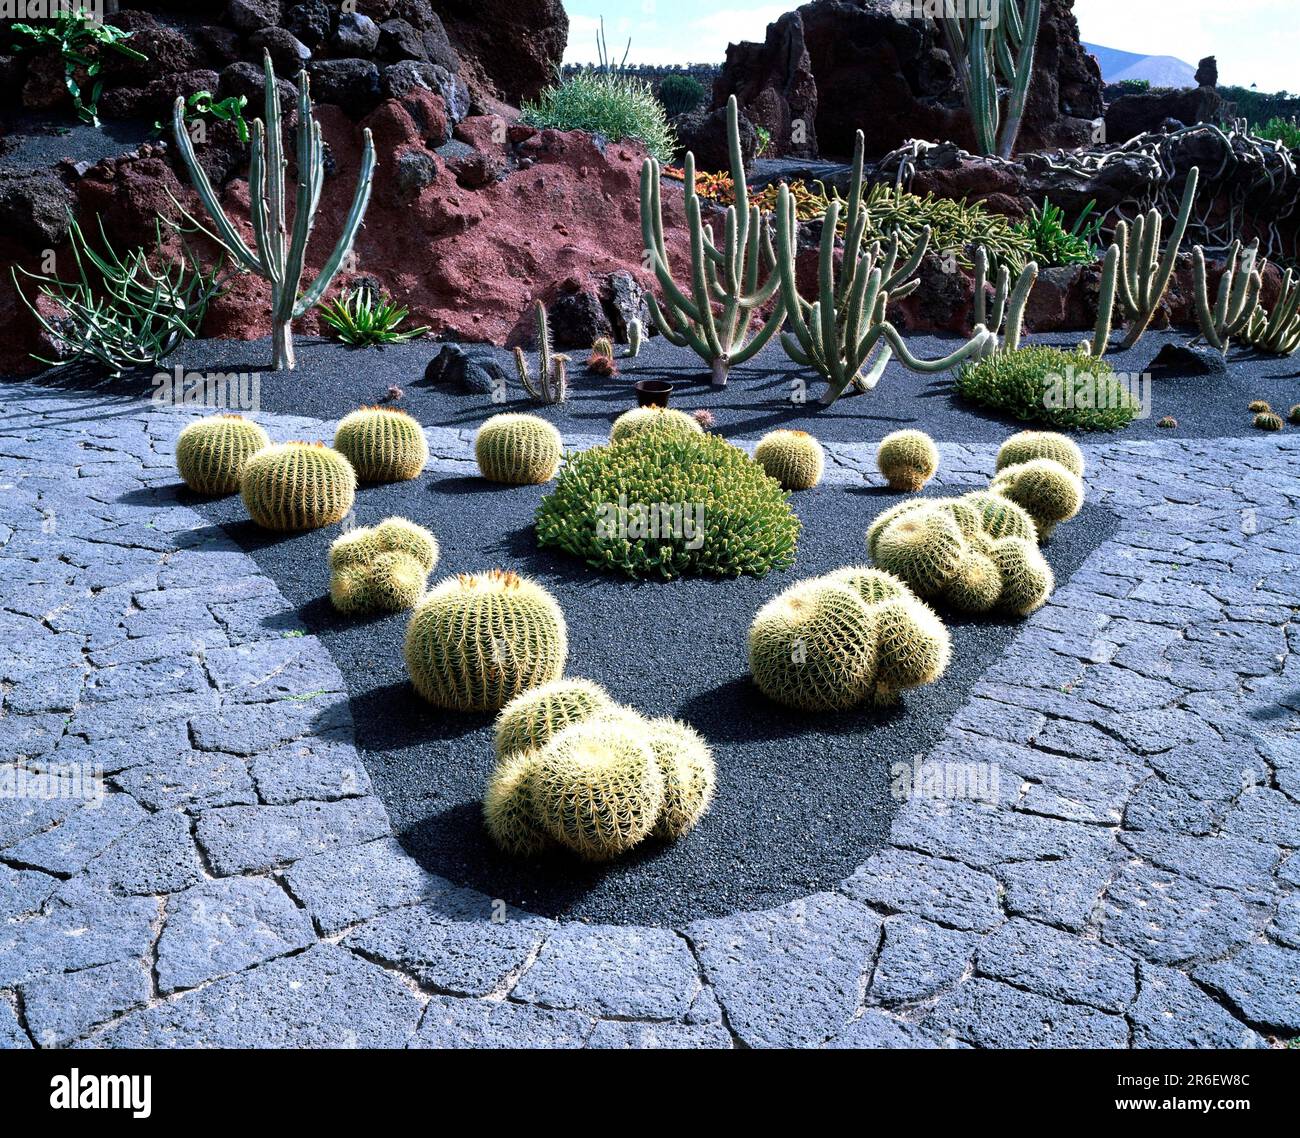 Cactus In Tray Stone Garden Decoration Stock Photo, Picture and Royalty  Free Image. Image 24667452.